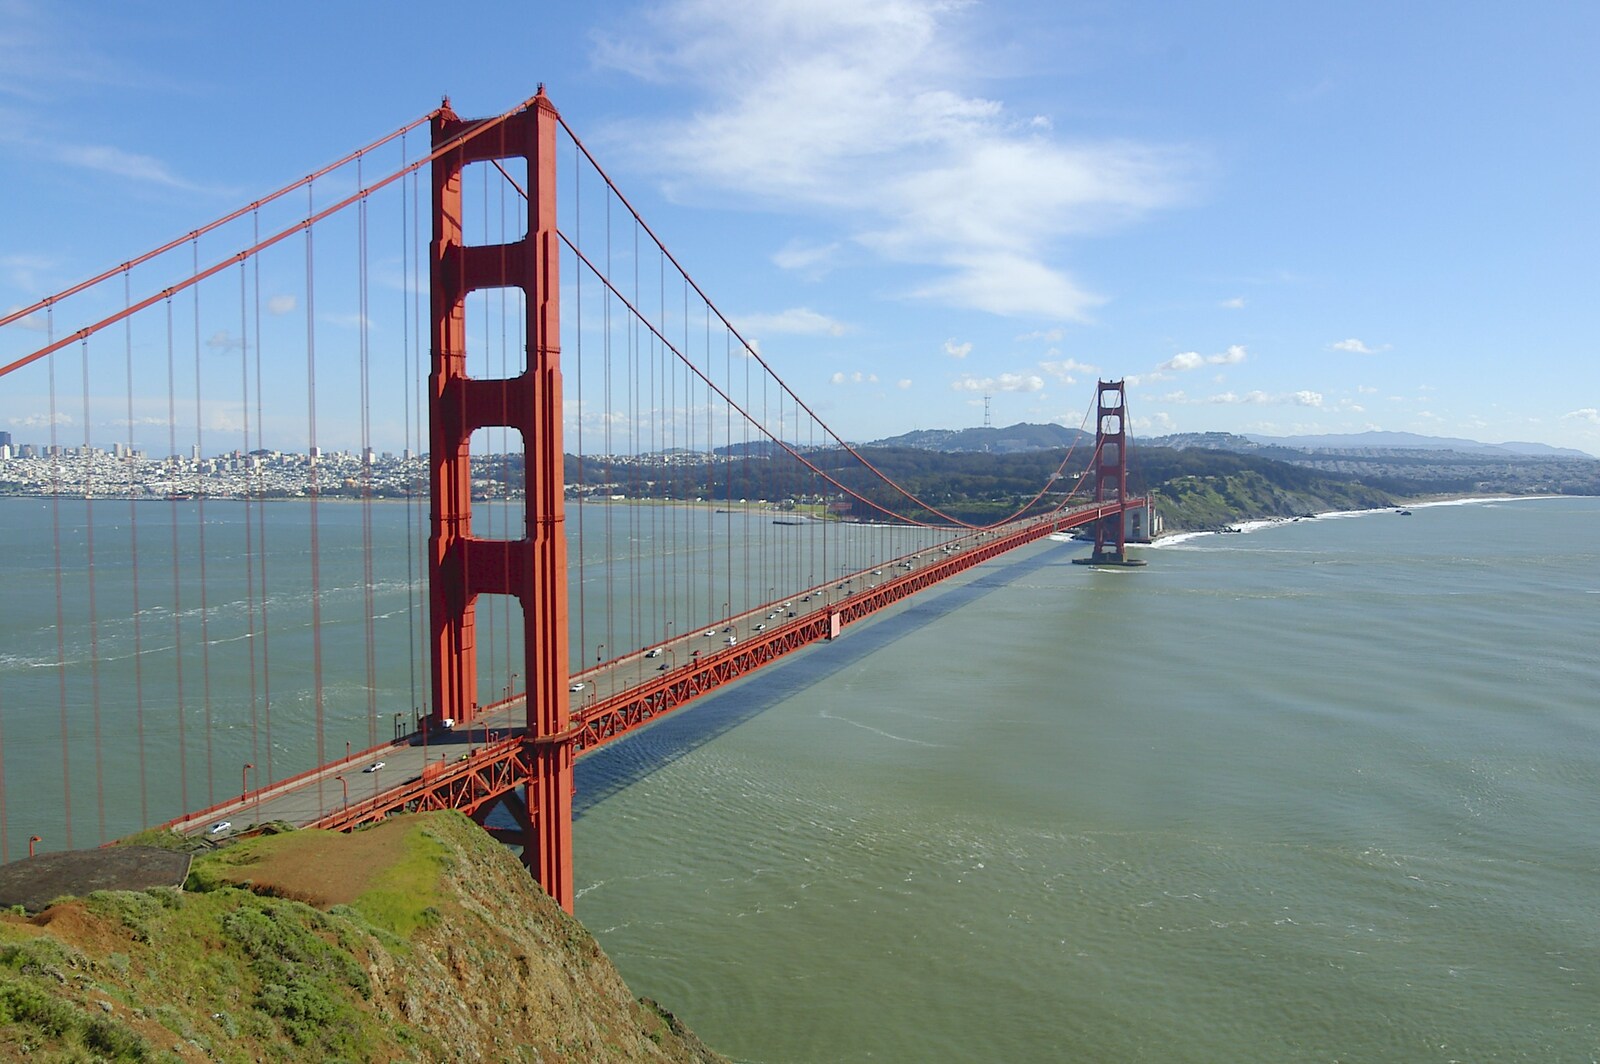 A classic view of the bridge from The Golden Gate Bridge, San Francisco, California, US - 11th March 2006